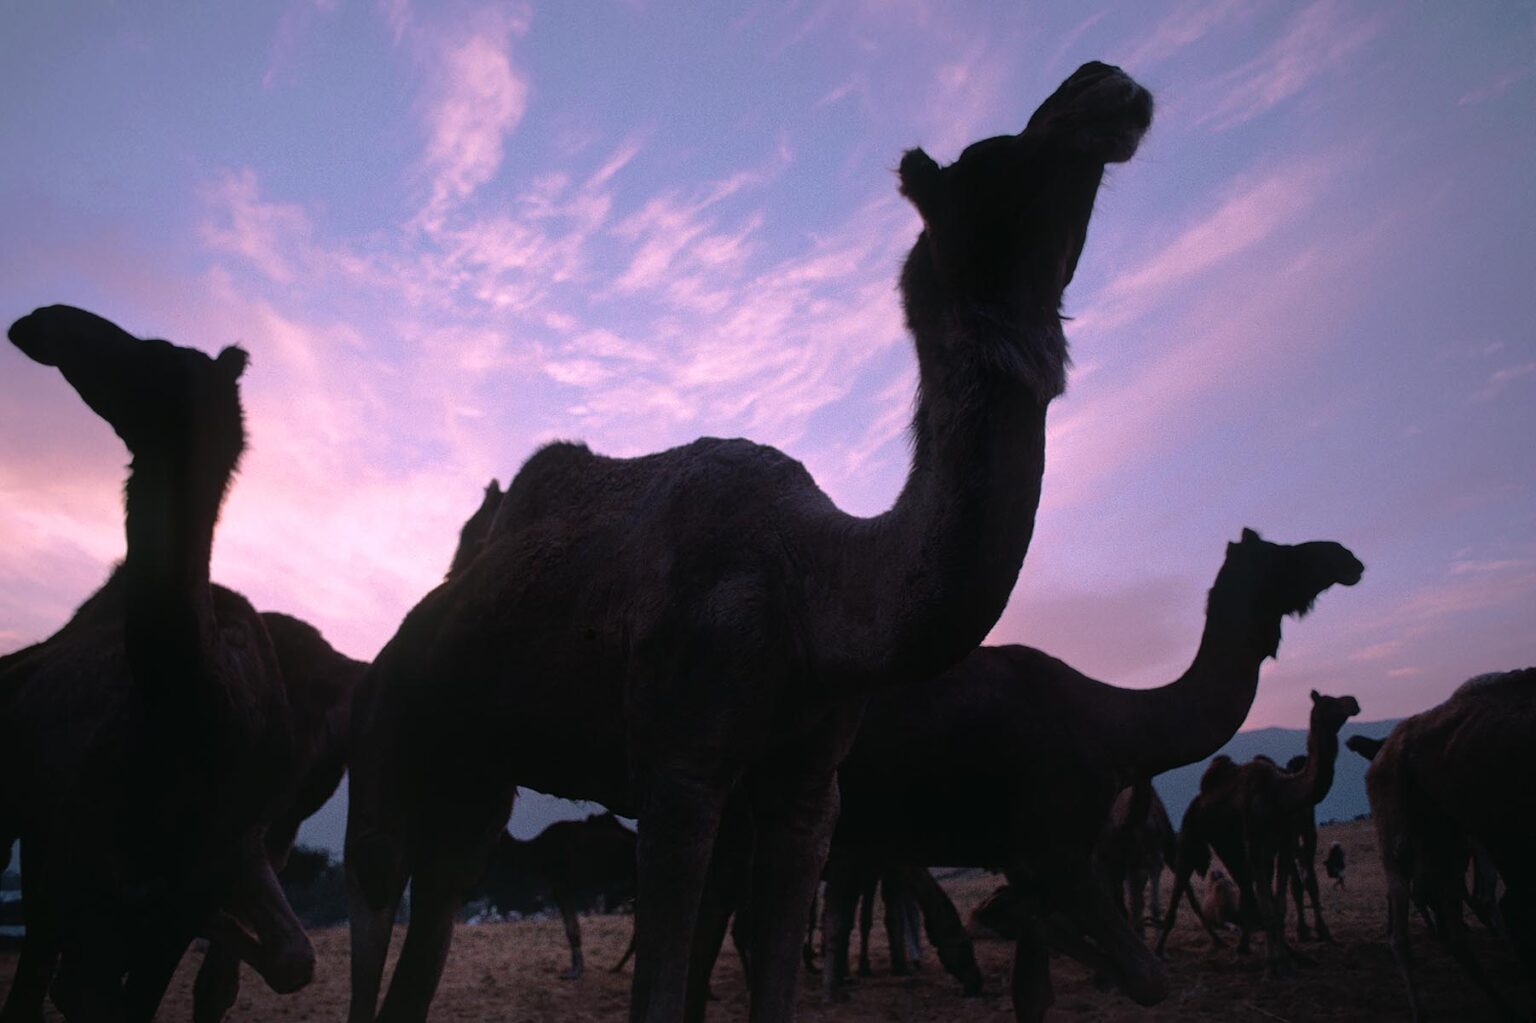 SUNRISE over a CAMEL TRAIN at the PUSHKAR CAMEL FAIR, a 5 day religious and commercial festival - RAJASTHAN, INDIA